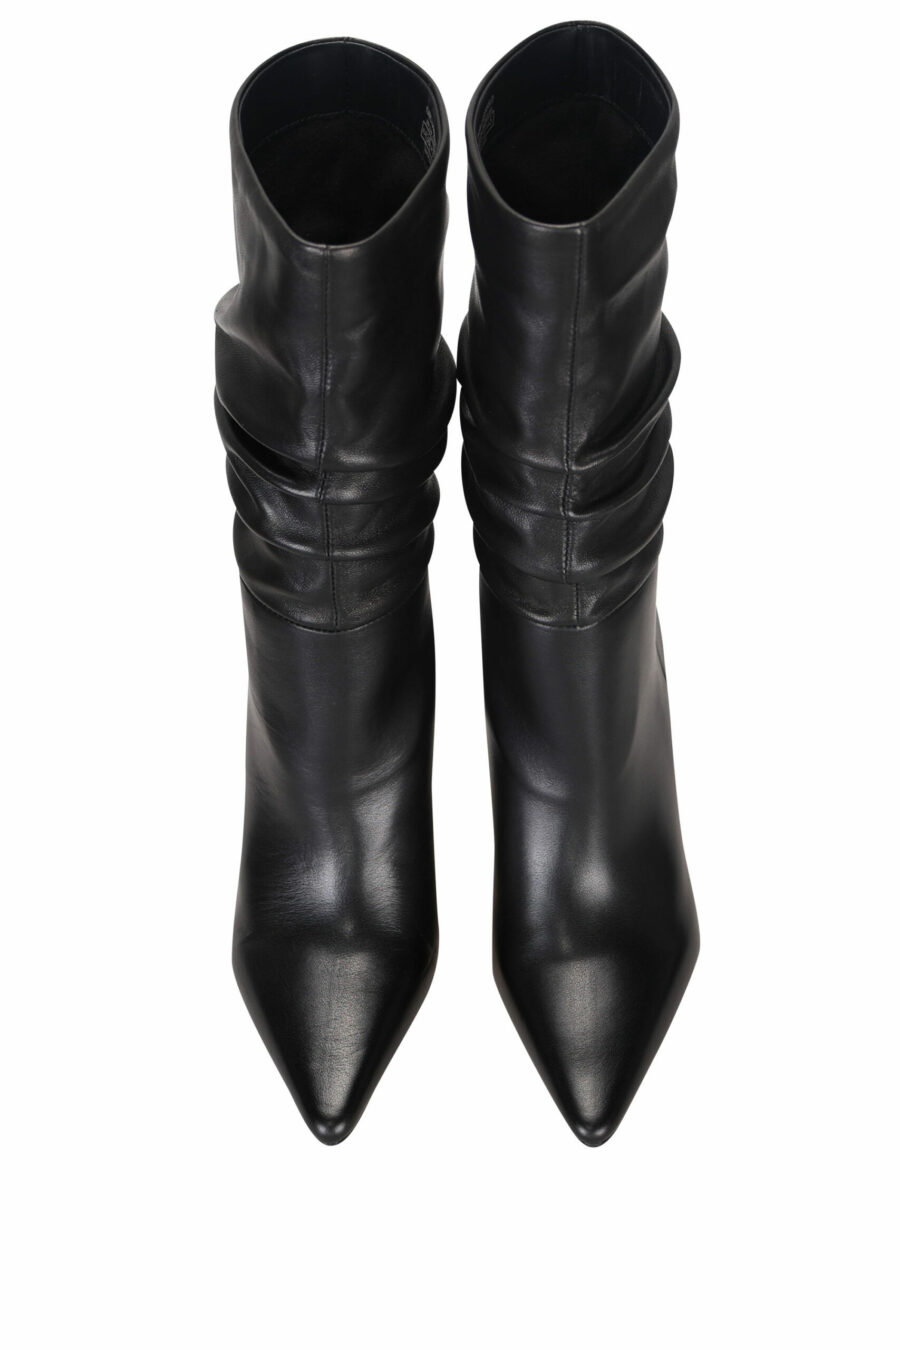 Black mix boots with heel and silver chain - 5059529313073 3 scaled